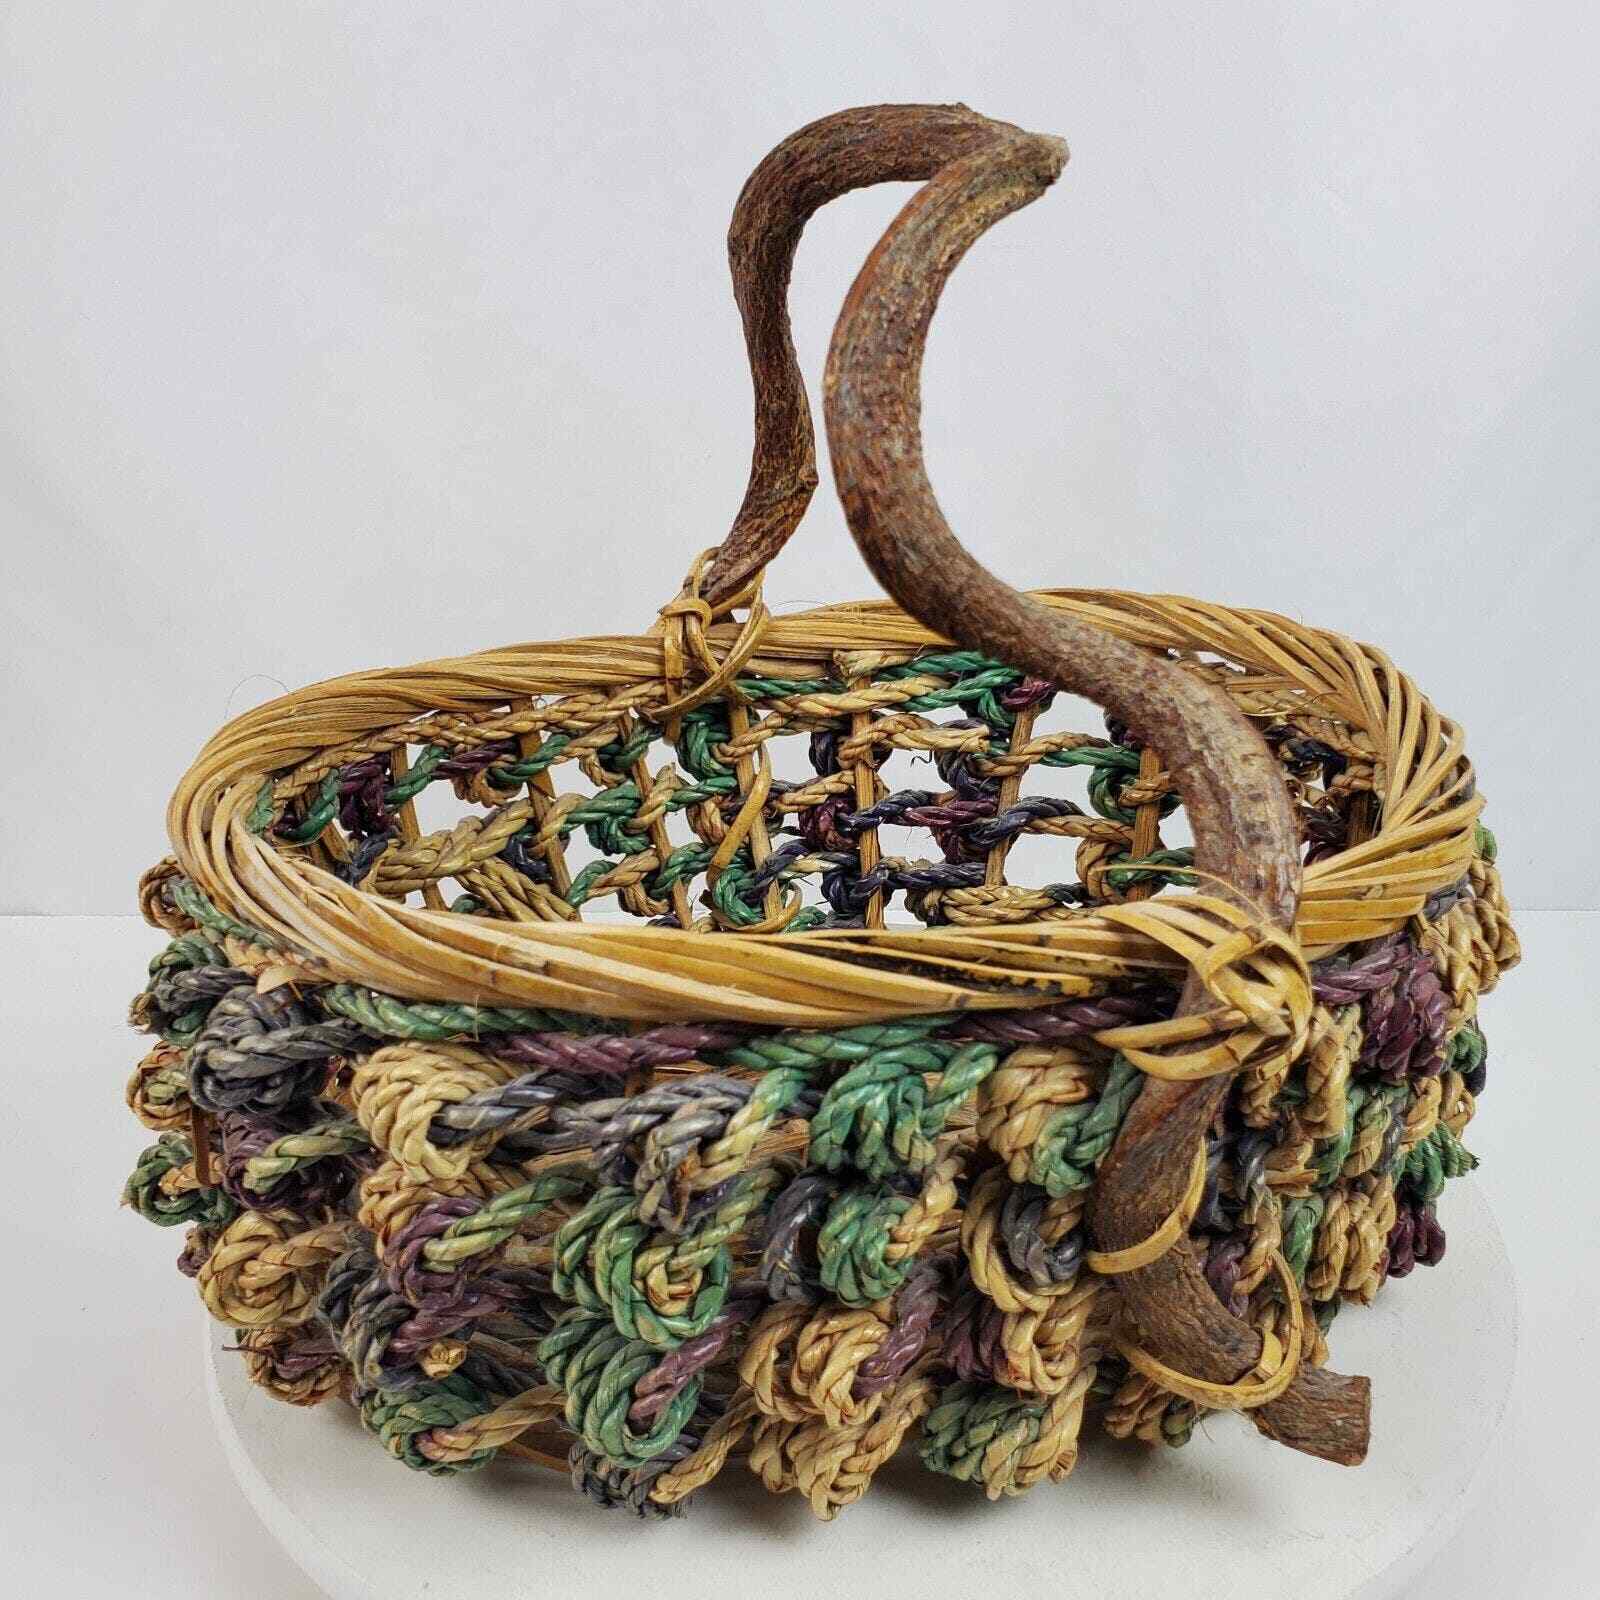 Vintage Handcrafted Basket Wicker w/ Gnarled Handle Approx 14x12 Inch